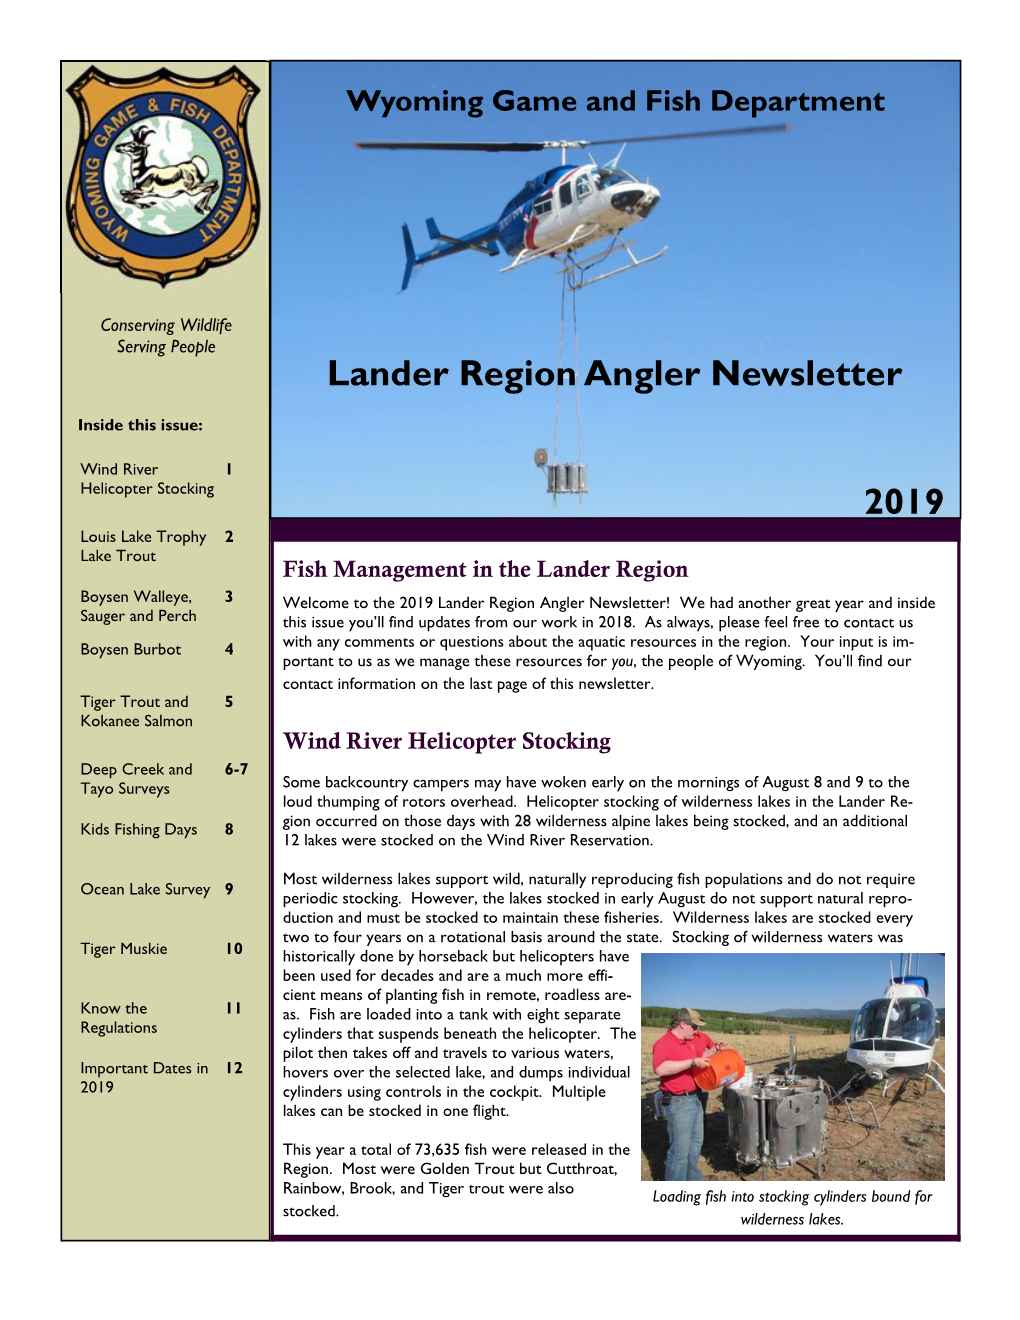 2019 Lander Region Angler Newsletter! We Had Another Great Year and Inside Sauger and Perch This Issue You’Ll Find Updates from Our Work in 2018